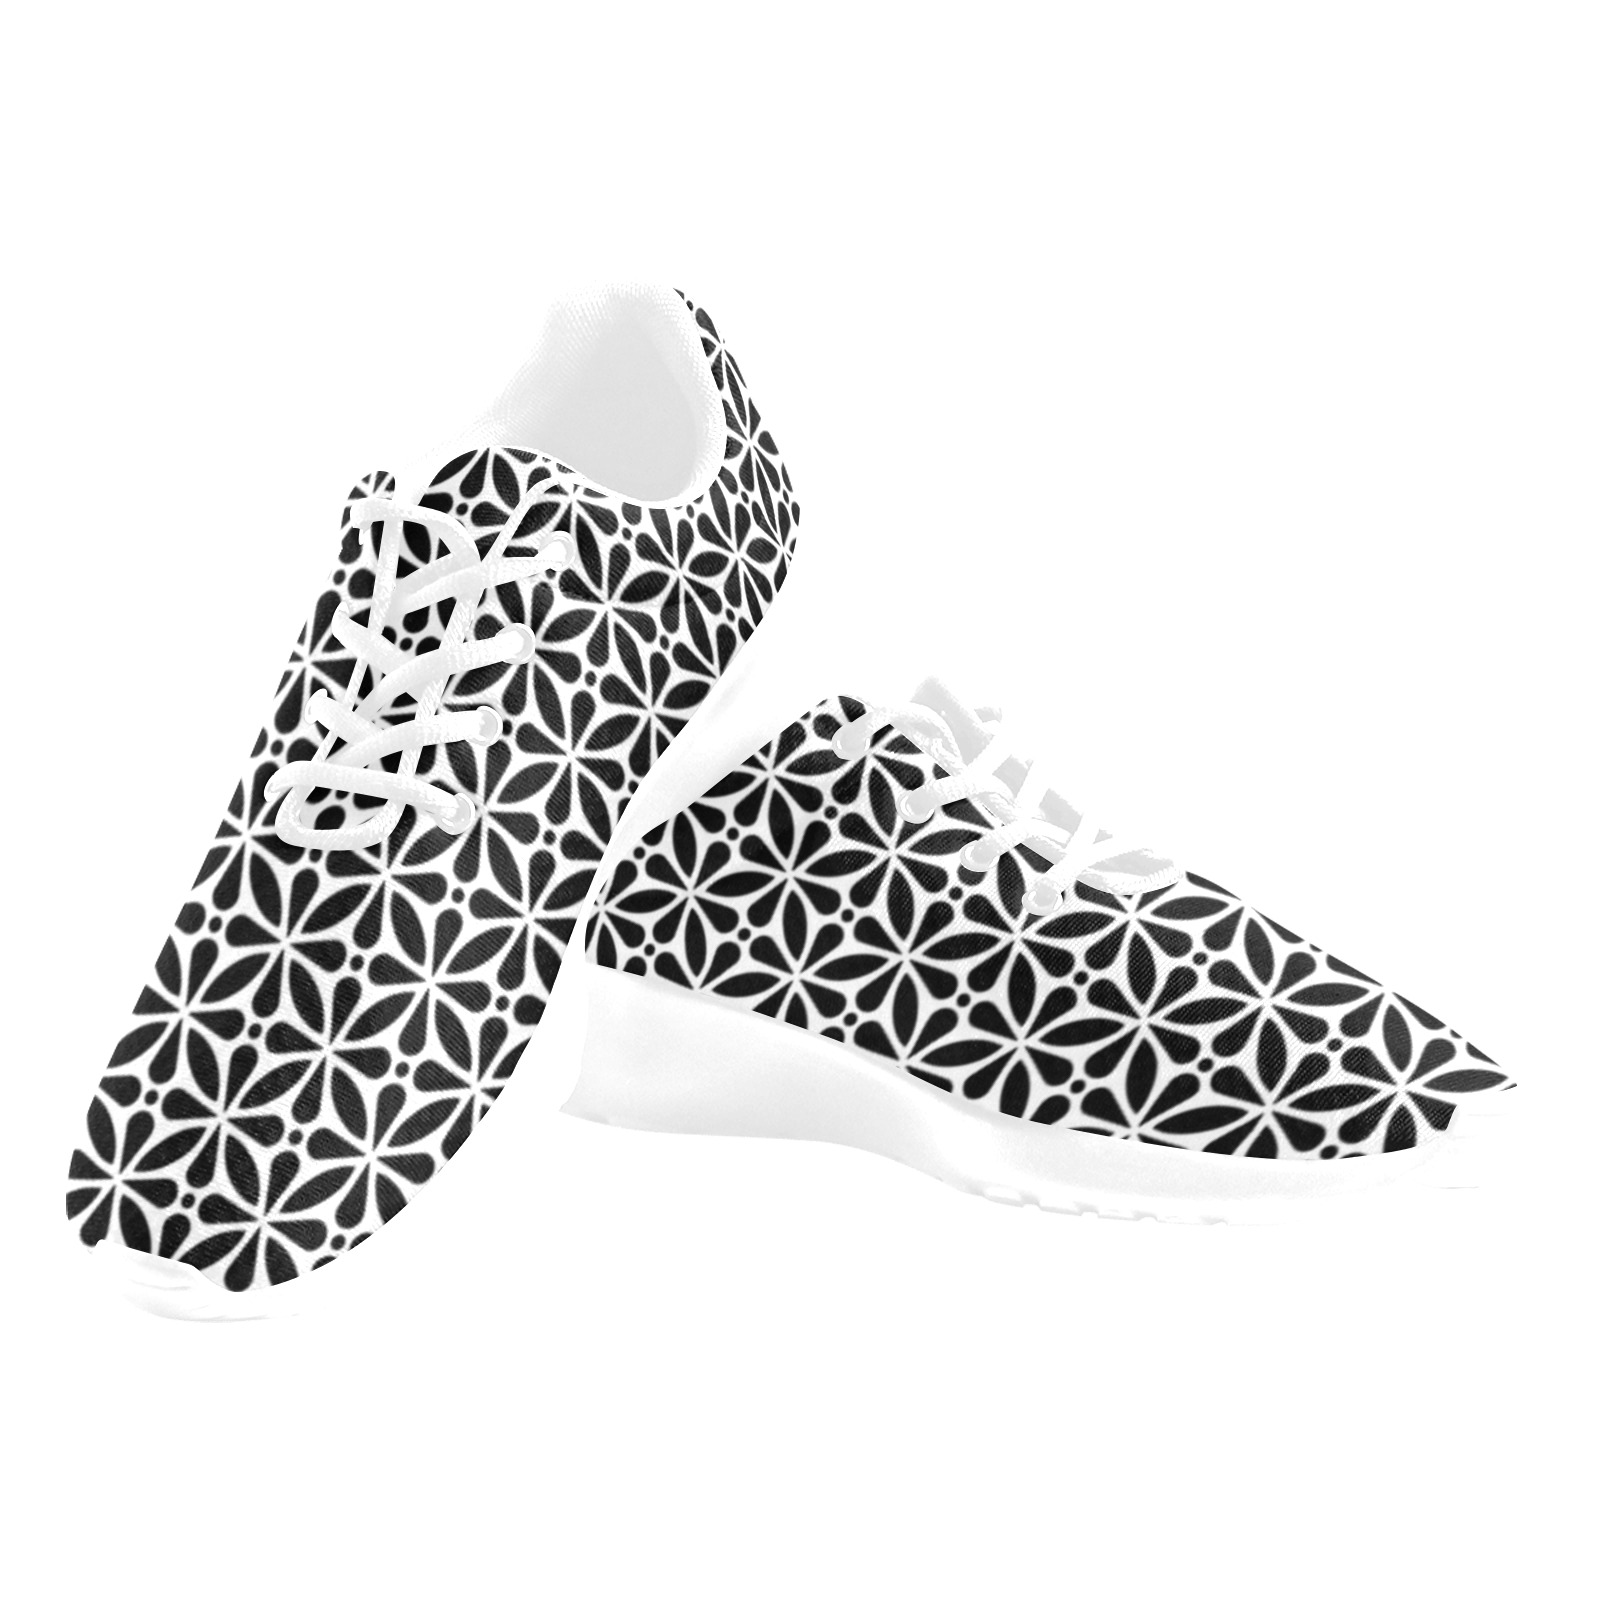 Black and White Abstract Floral Motif Women's Athletic Shoes (Model 0200)